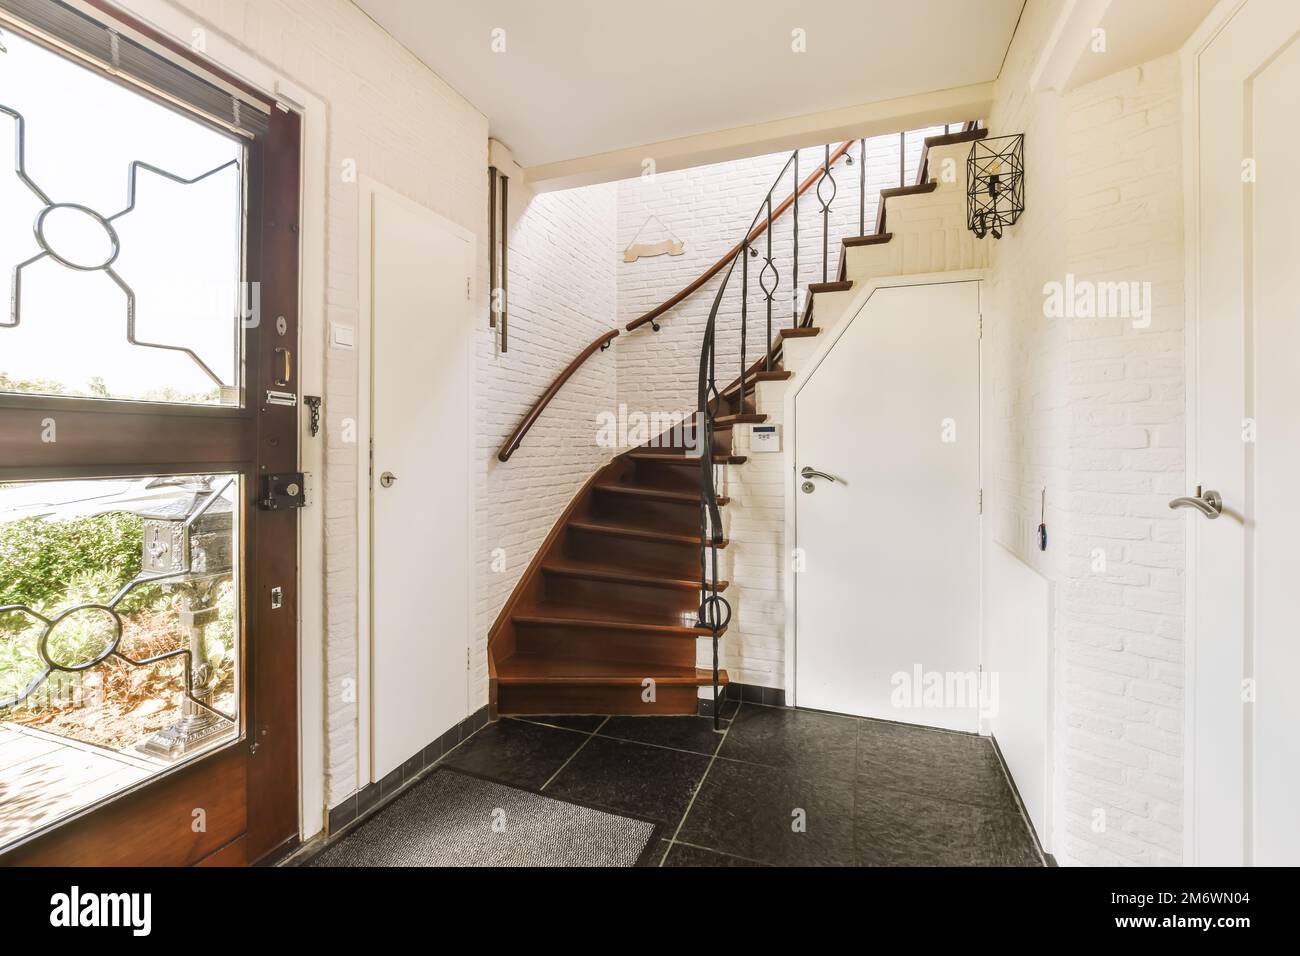 https://c8.alamy.com/comp/2M6WN04/a-staircase-leading-up-to-the-second-floor-in-a-modern-home-with-white-brick-walls-and-black-tiles-on-the-floor-2M6WN04.jpg